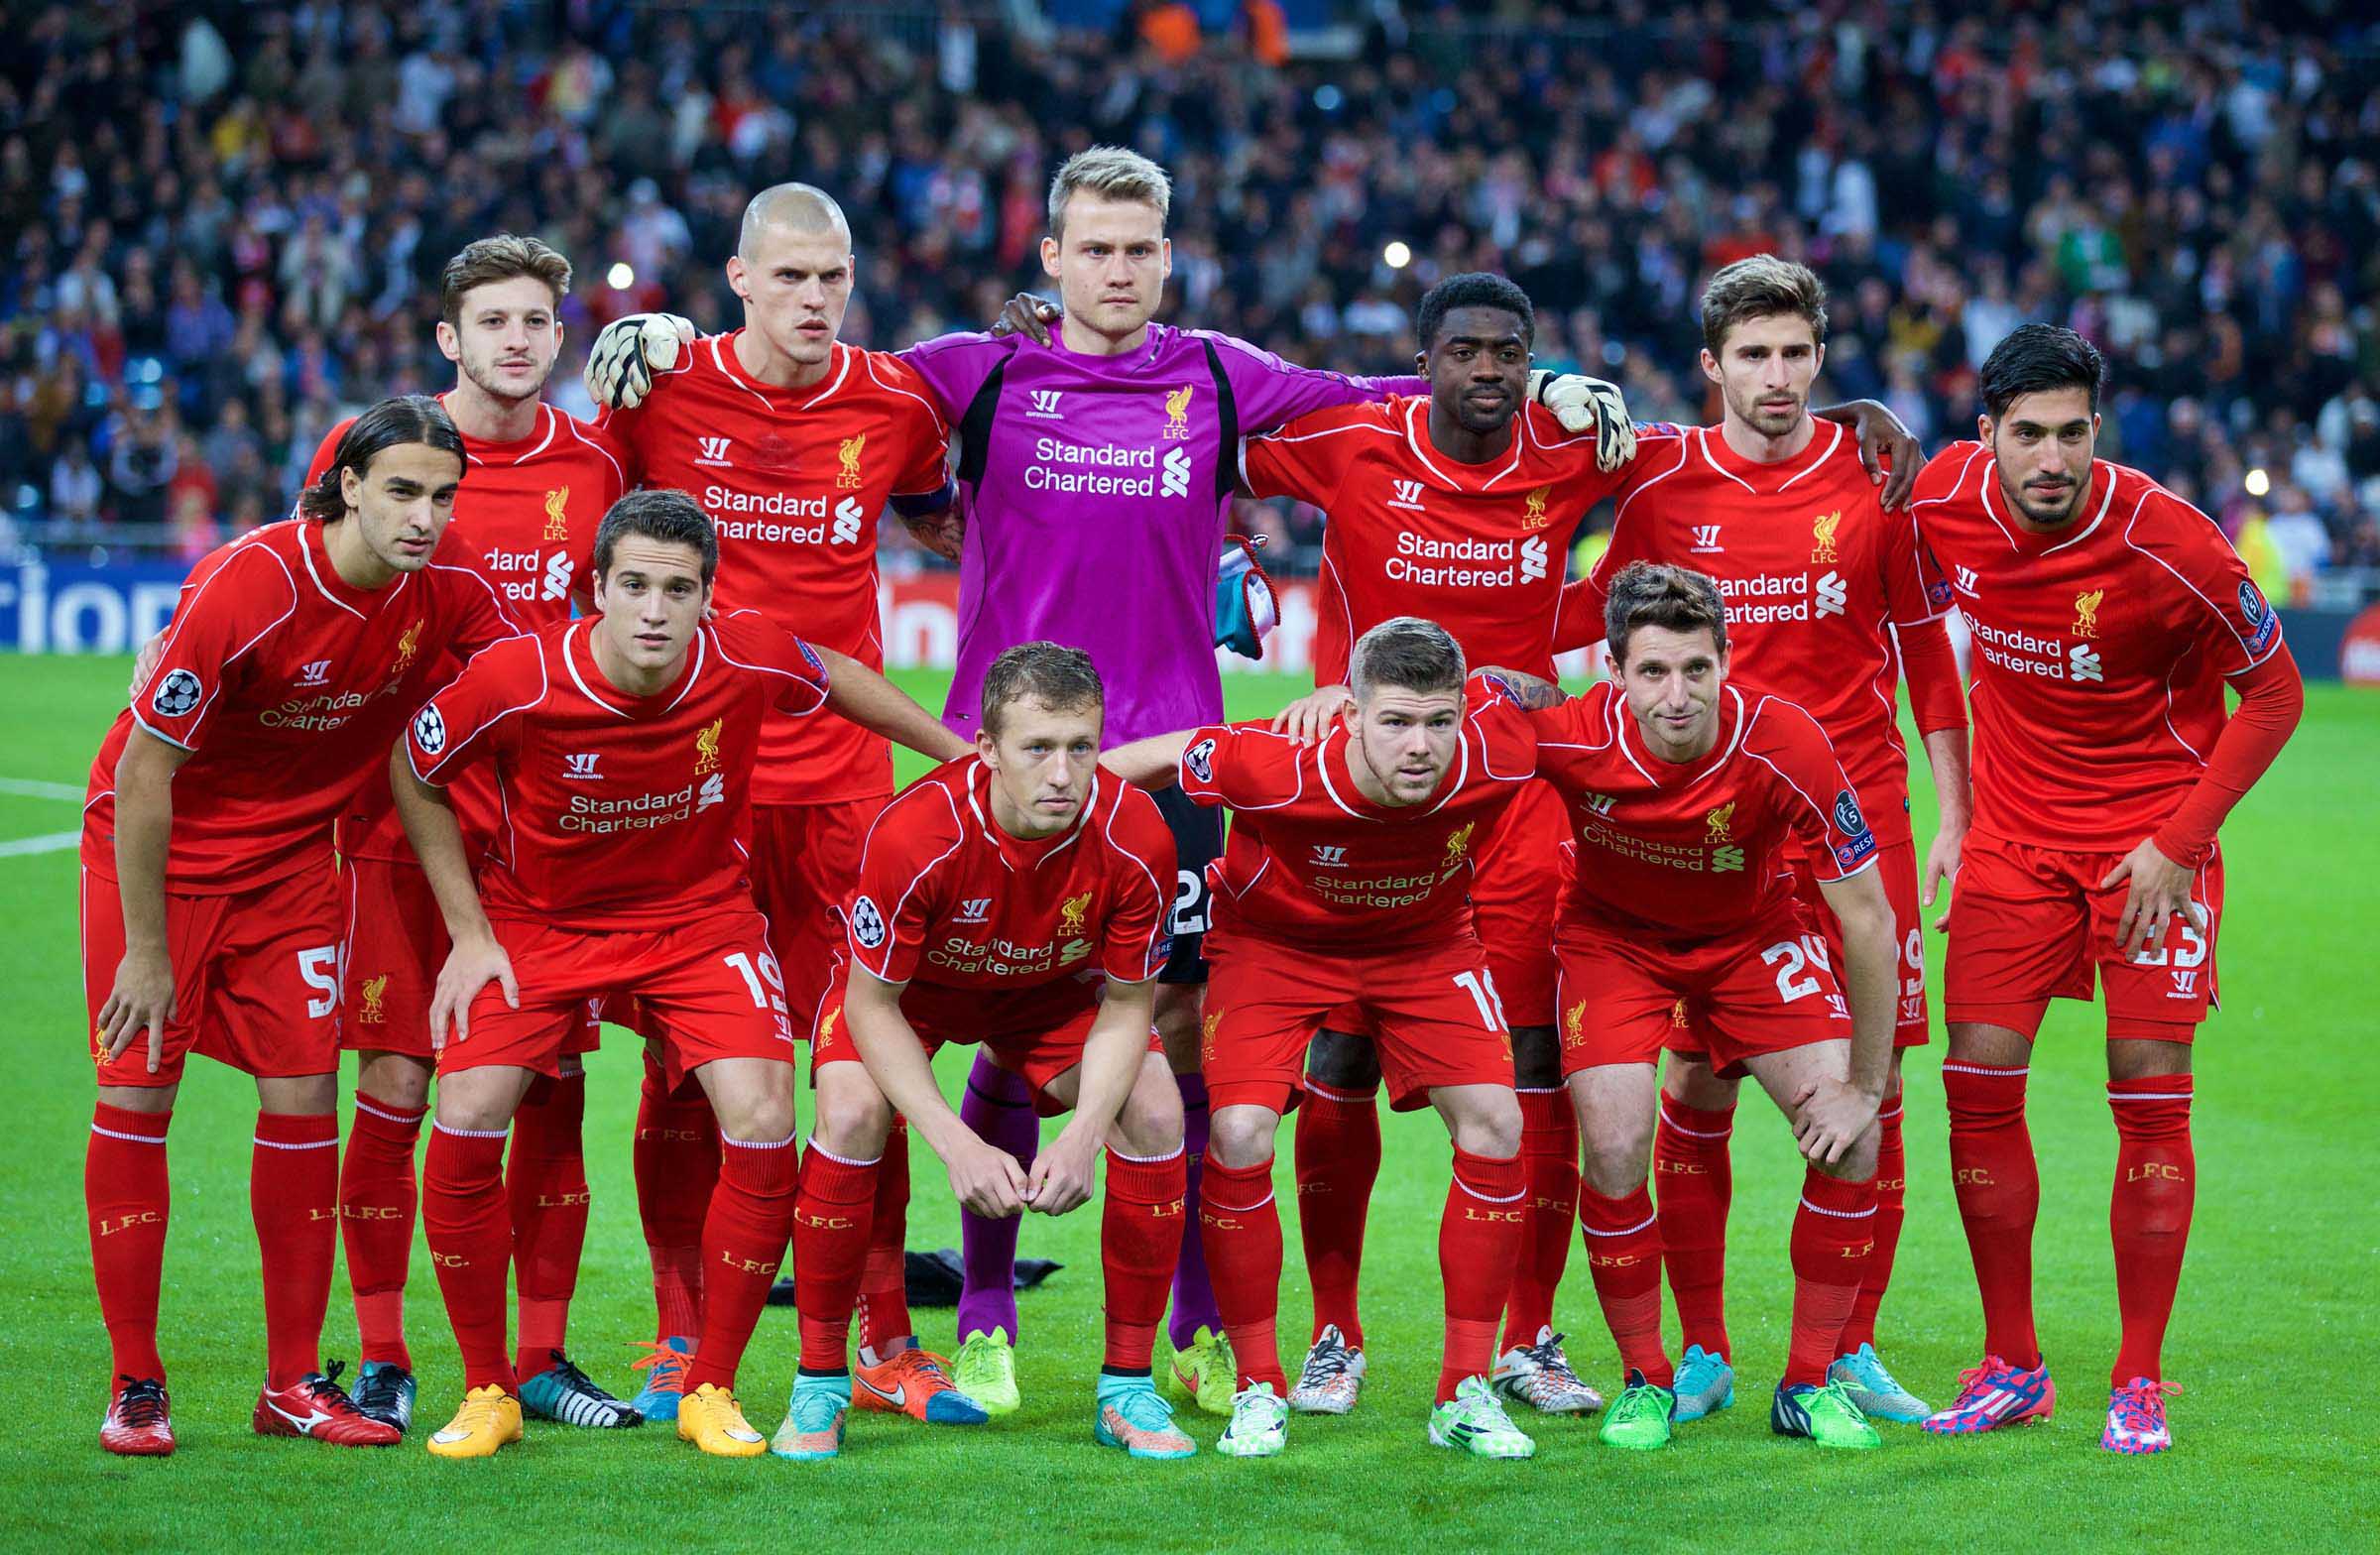 NEIL ATKINSON'S MATCH REVIEW: REAL MADRID 1 LIVERPOOL 0 - The Anfield Wrap